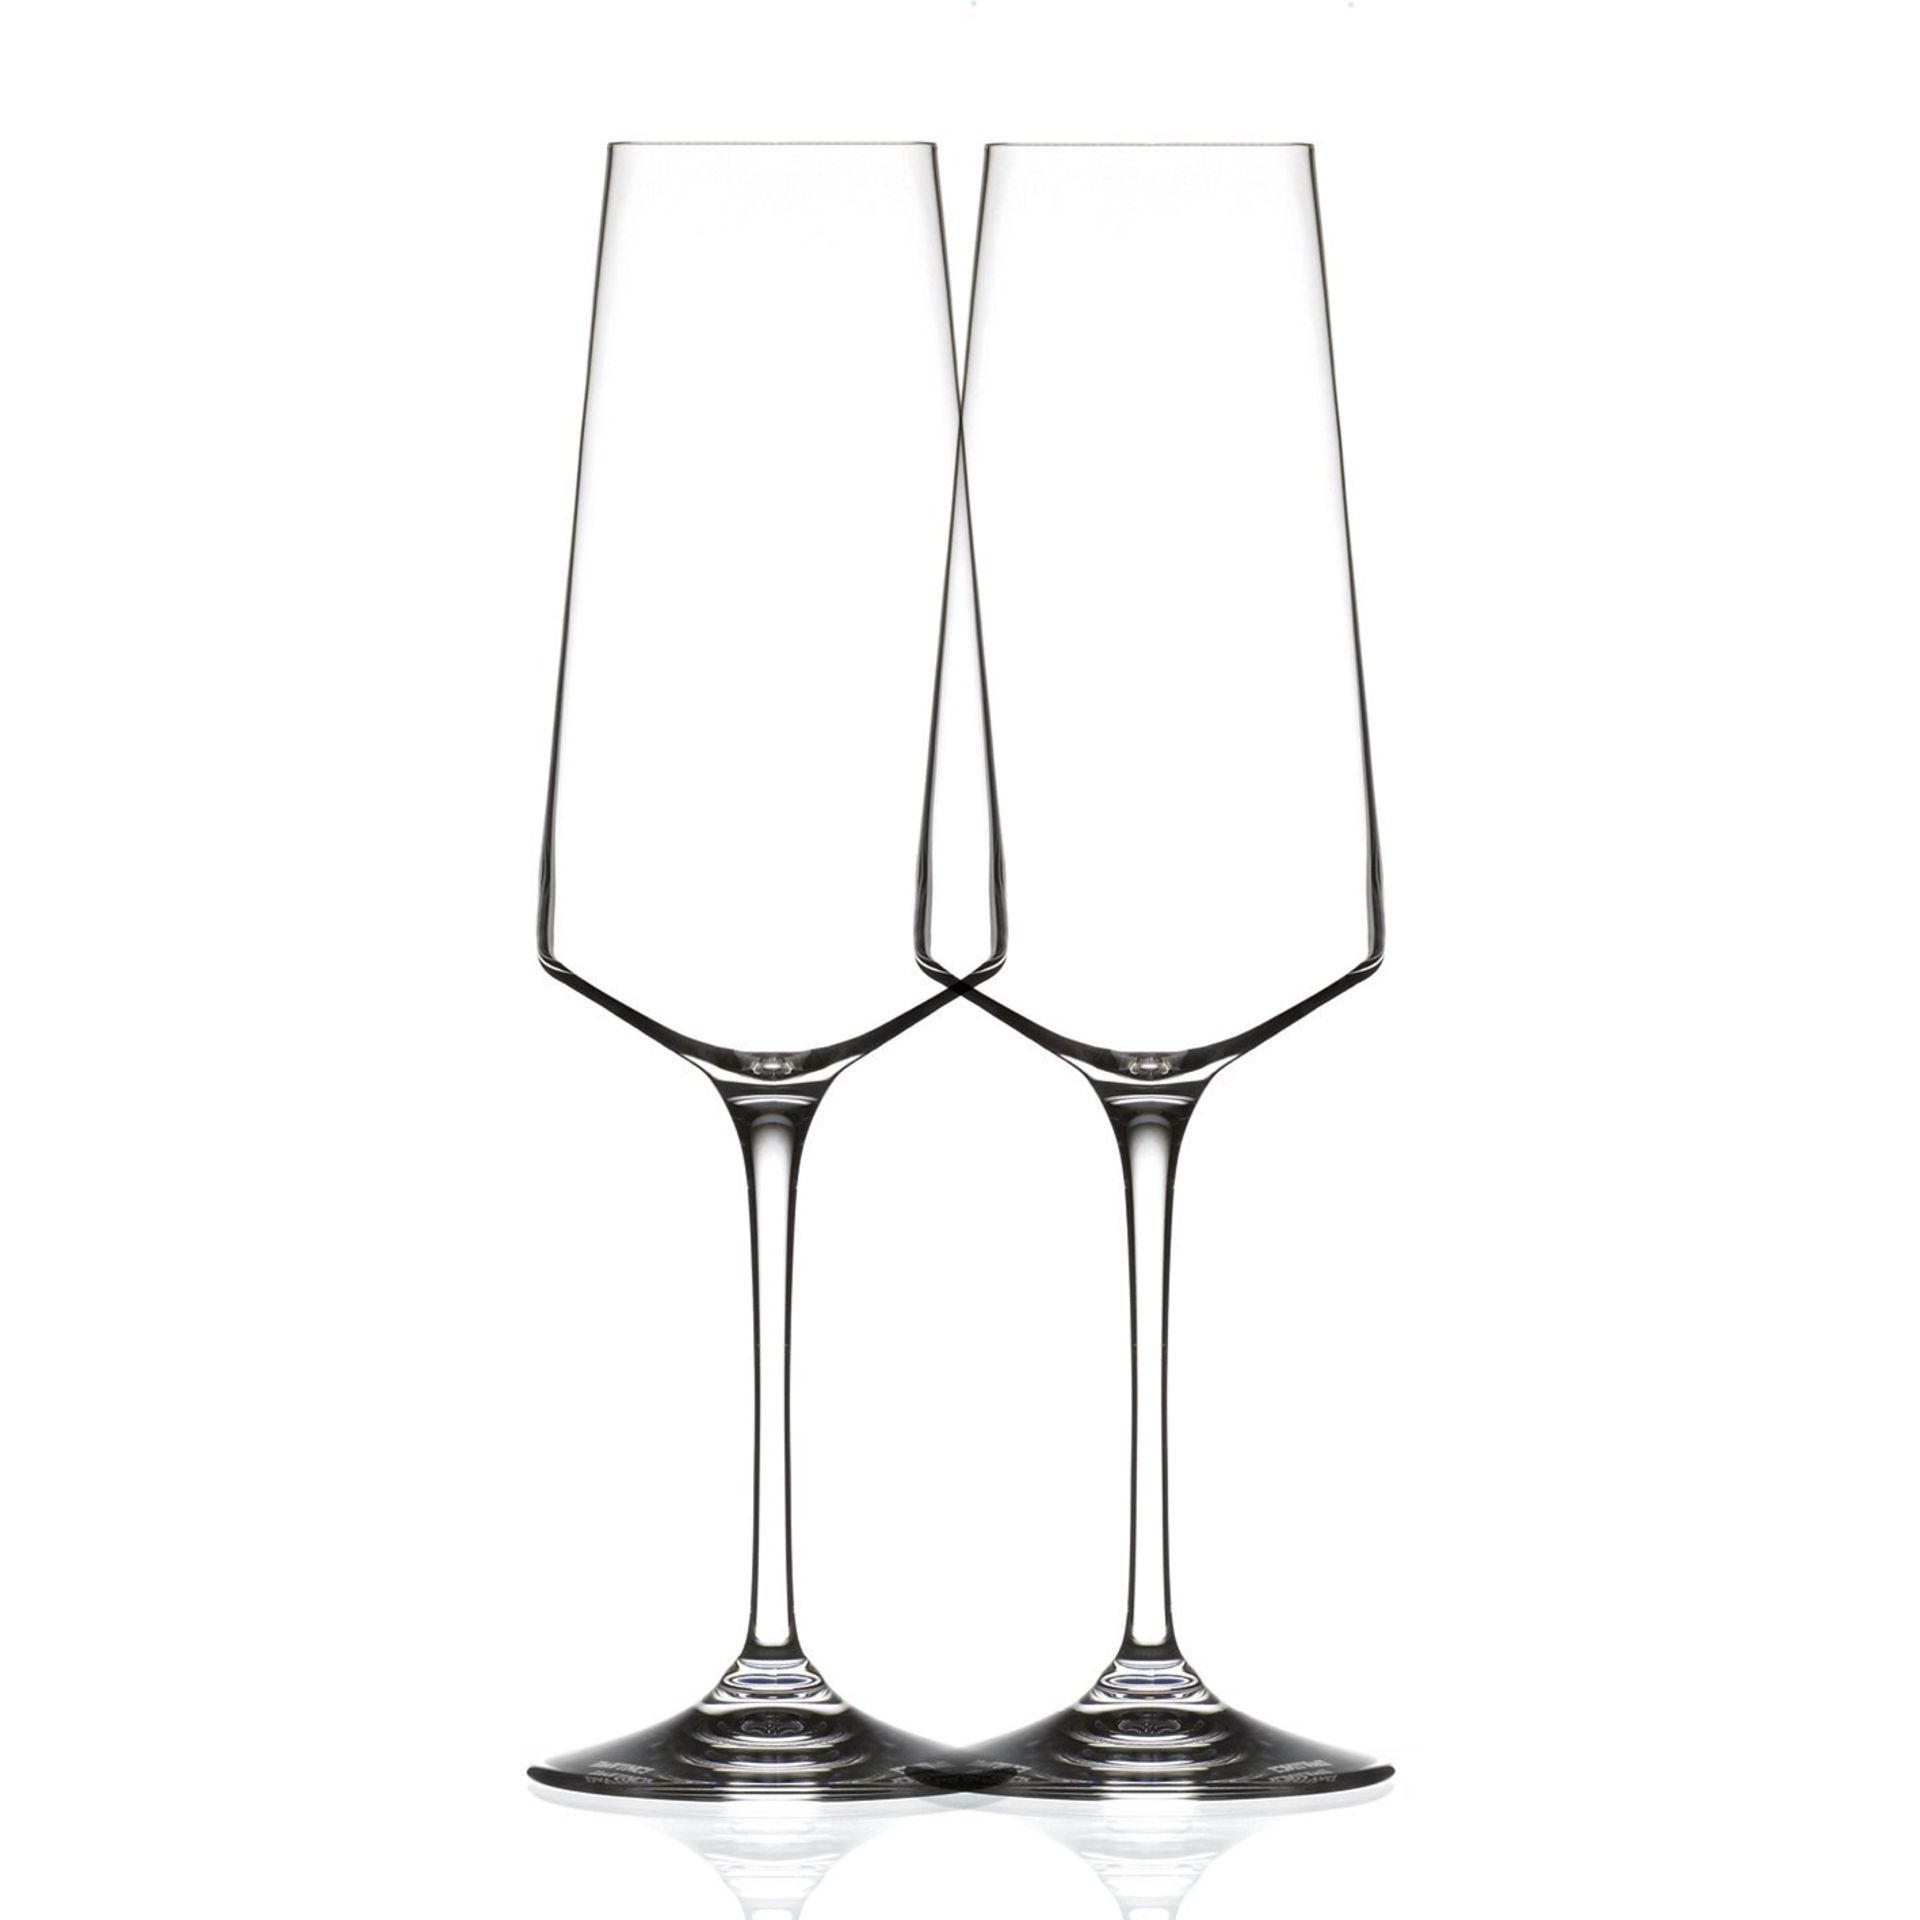 V Brand New Twin Pack of RCR Armonia Italian Crystal 35cl Champagne Flutes Amazon Price £29.99